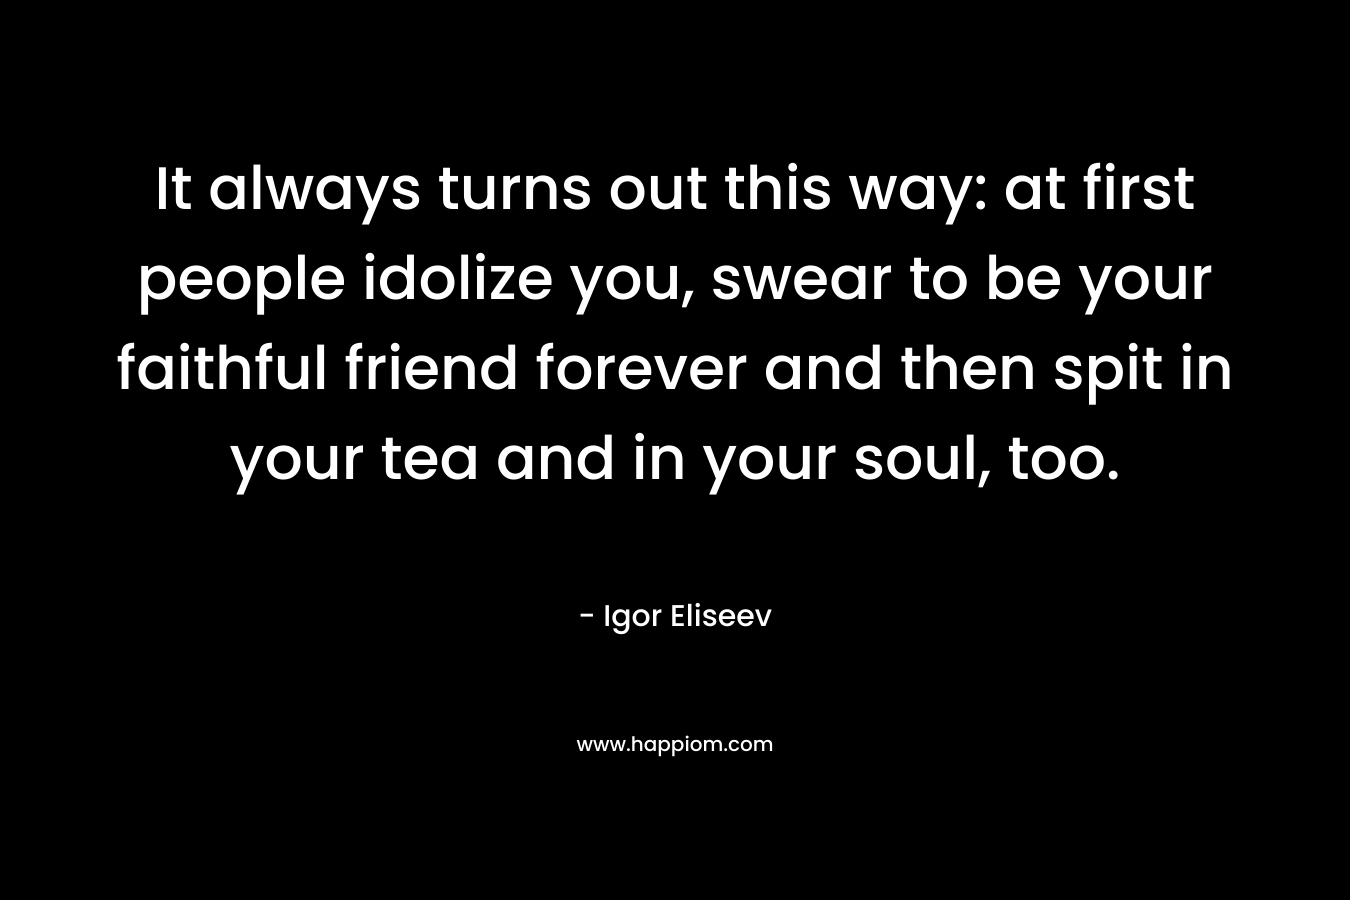 It always turns out this way: at first people idolize you, swear to be your faithful friend forever and then spit in your tea and in your soul, too. – Igor Eliseev